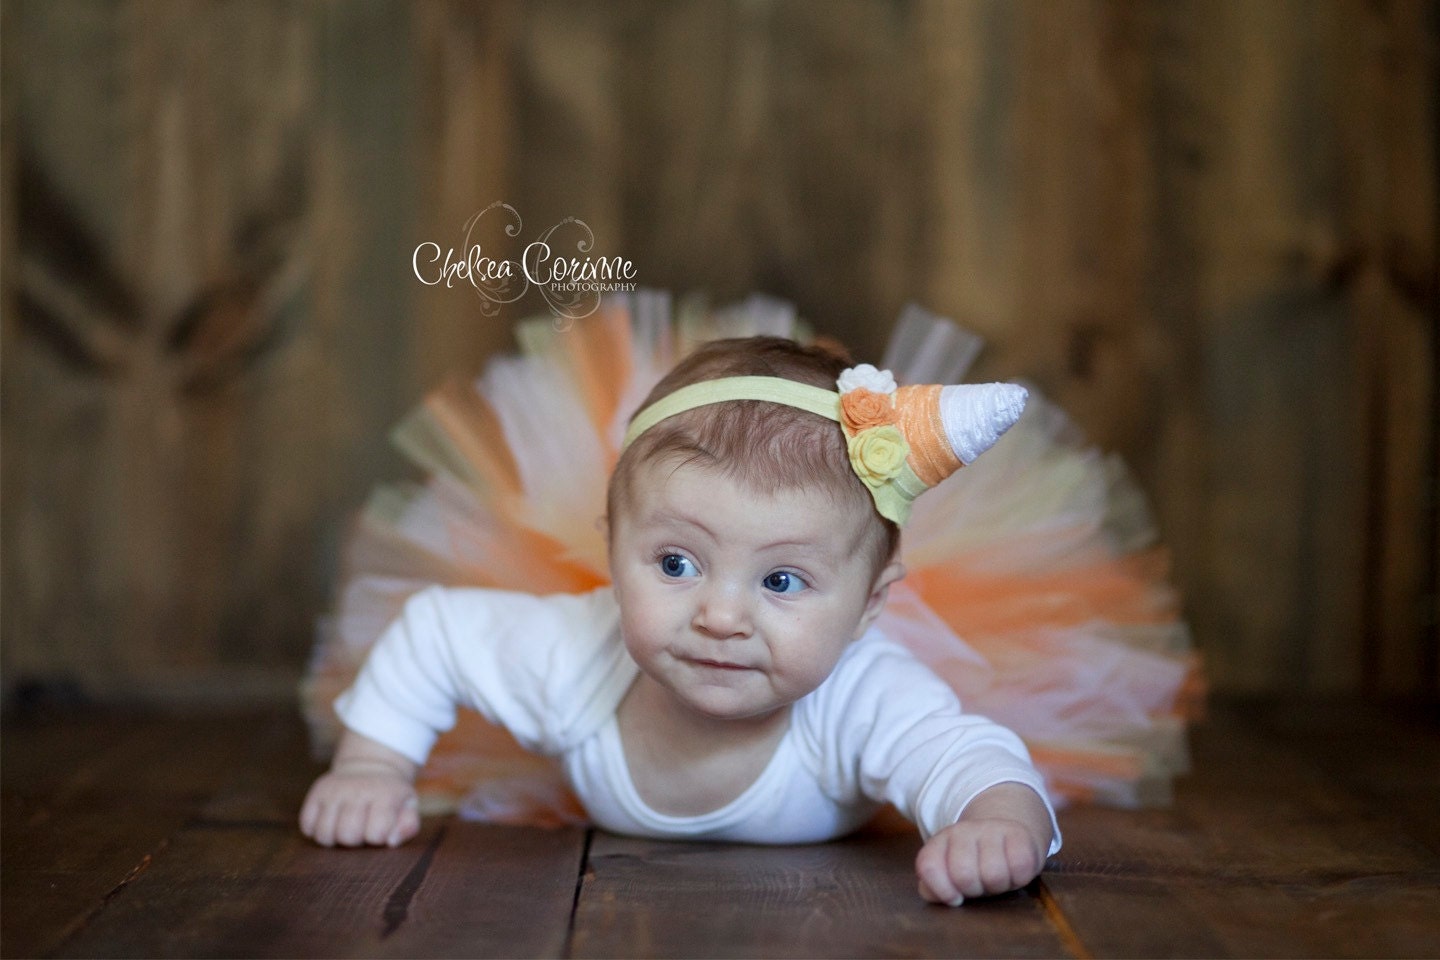 Infant Candy Corn Costume Pattern